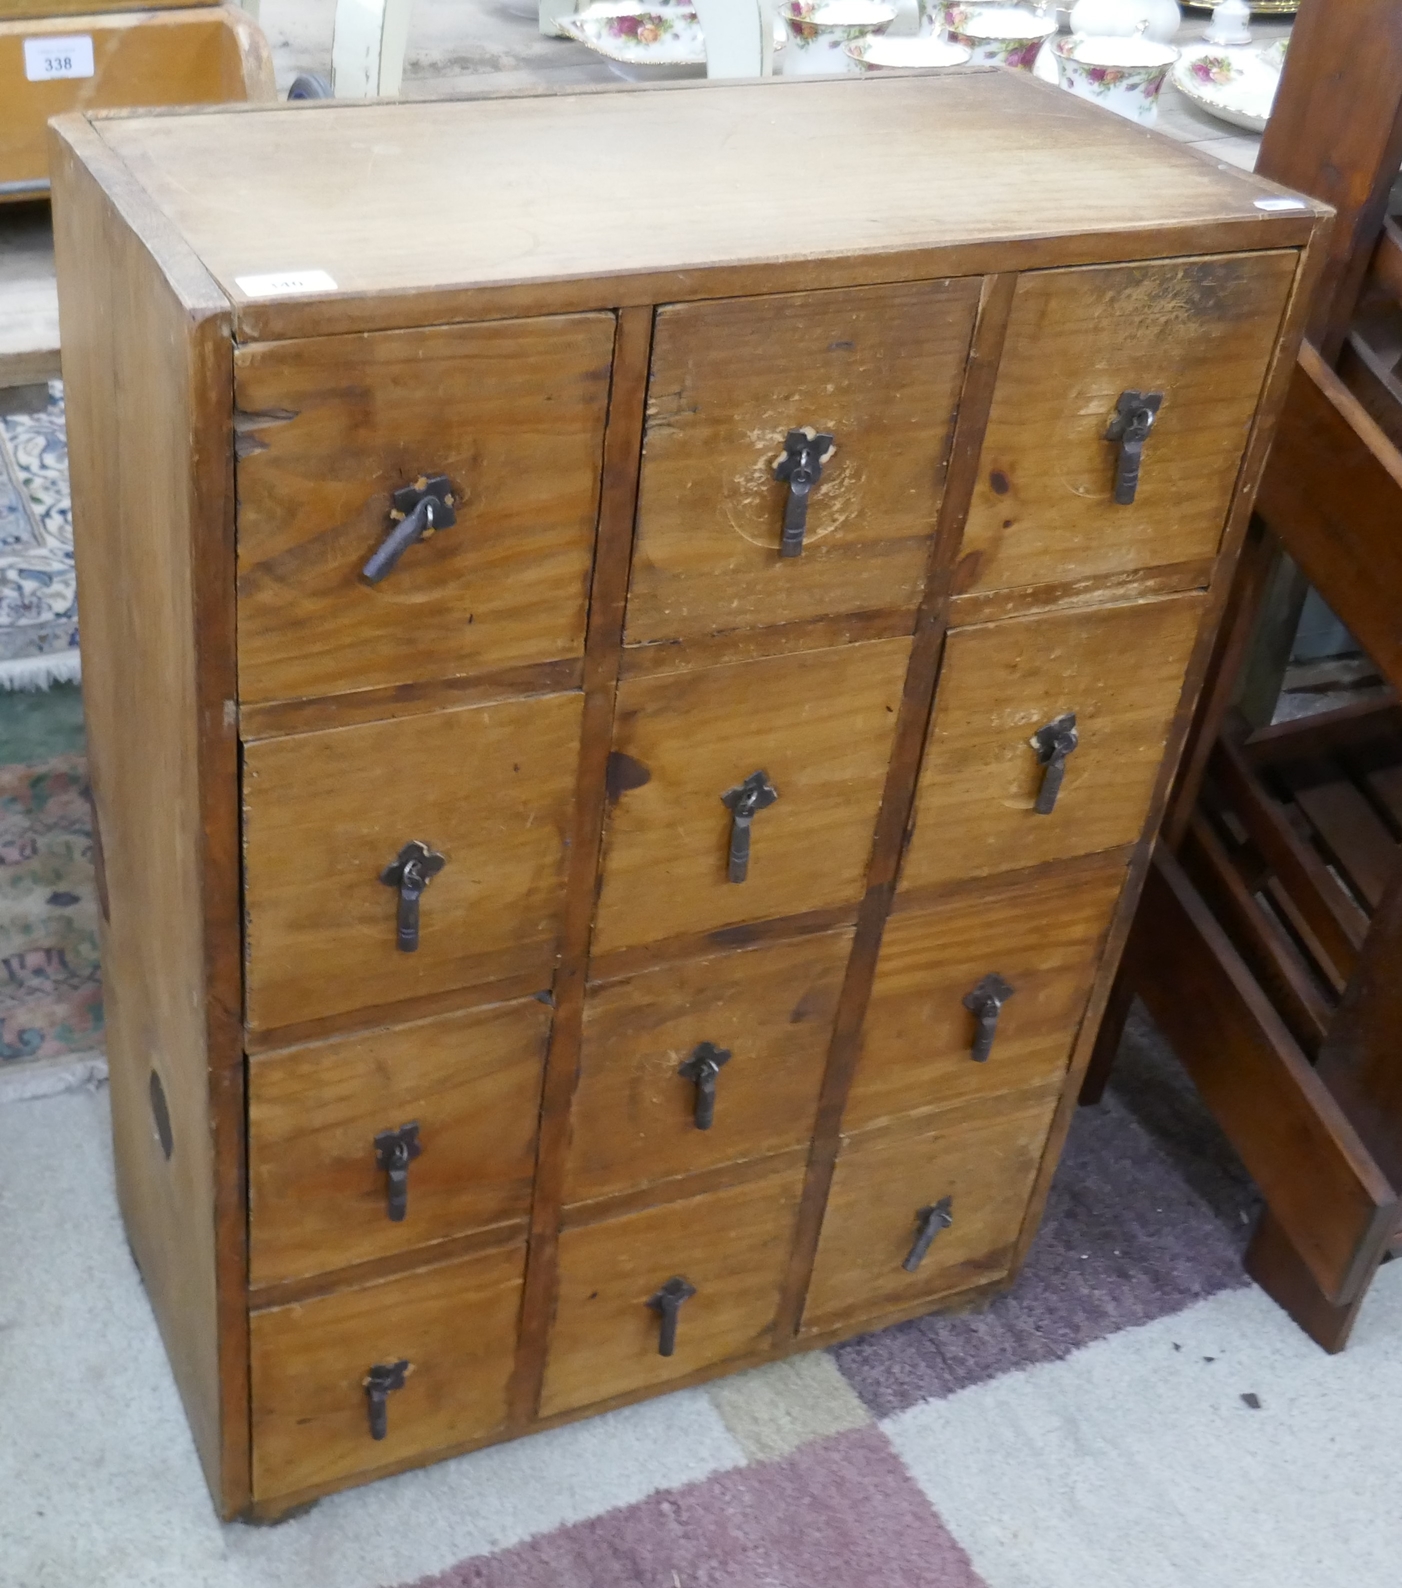 Multi drawer pine apothecary chest - Approx size: W: 59cm D: 29cm H: 80cm